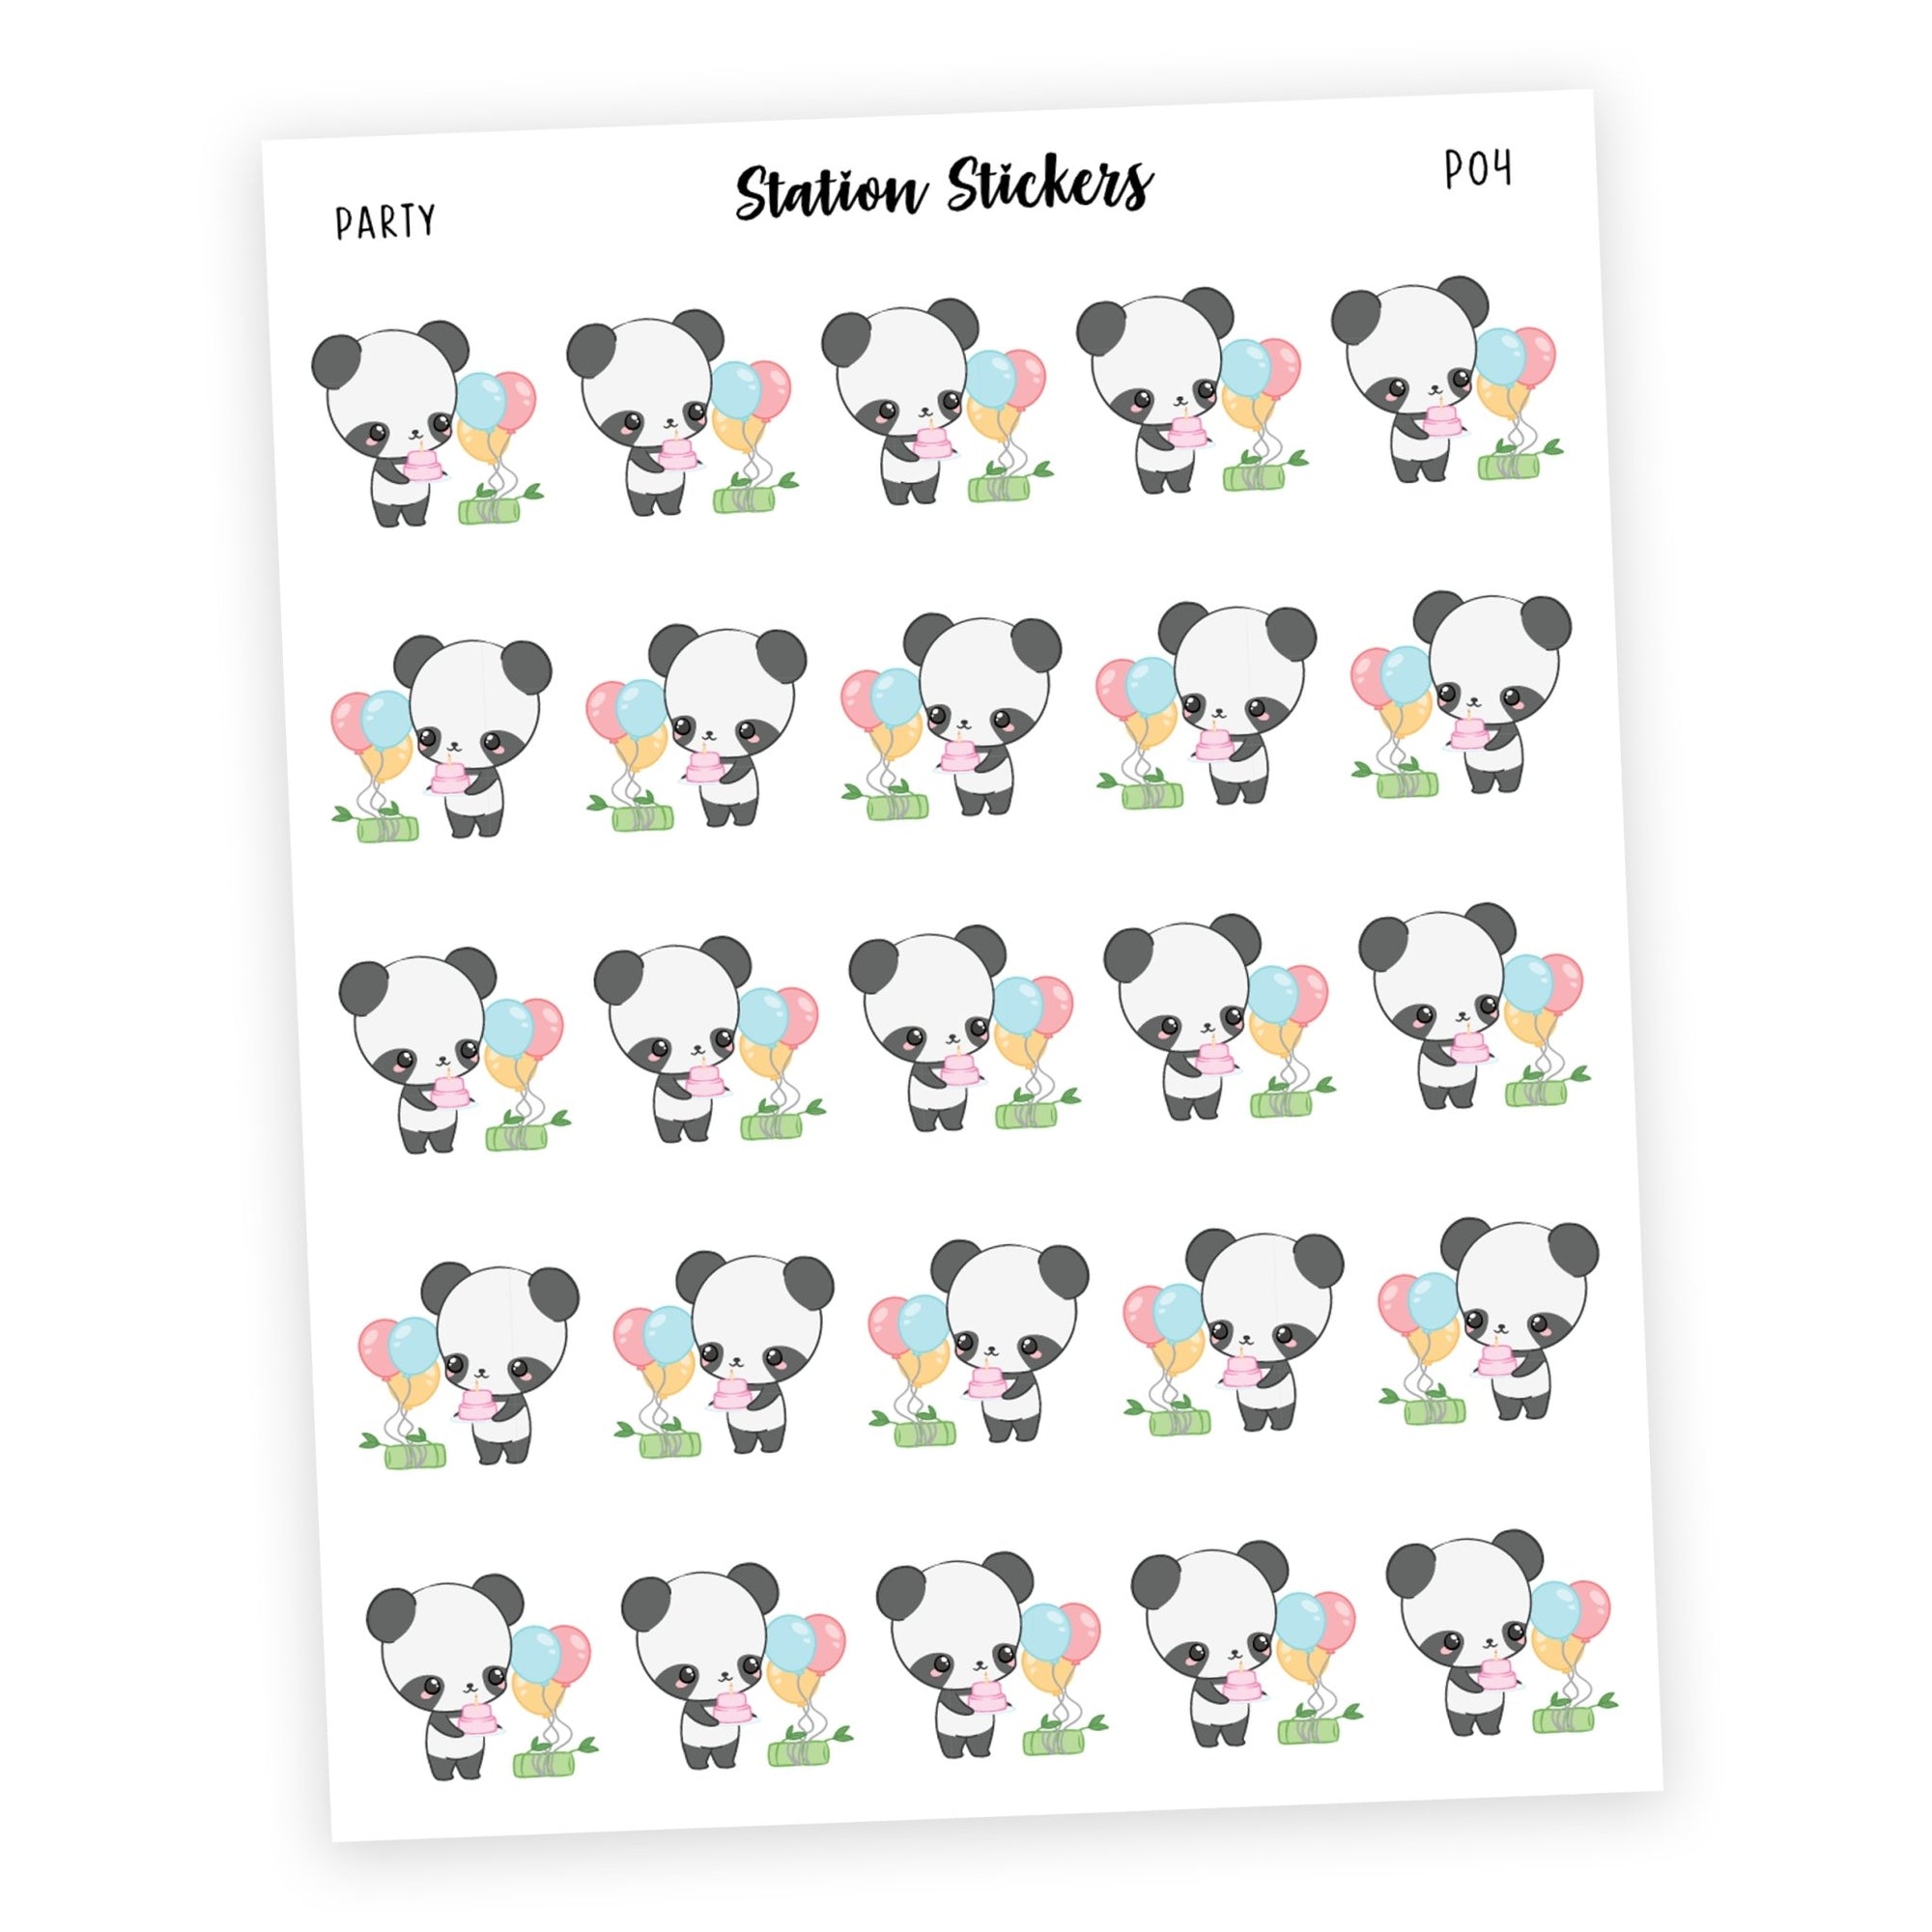 PARTY • PANDA - Station Stickers